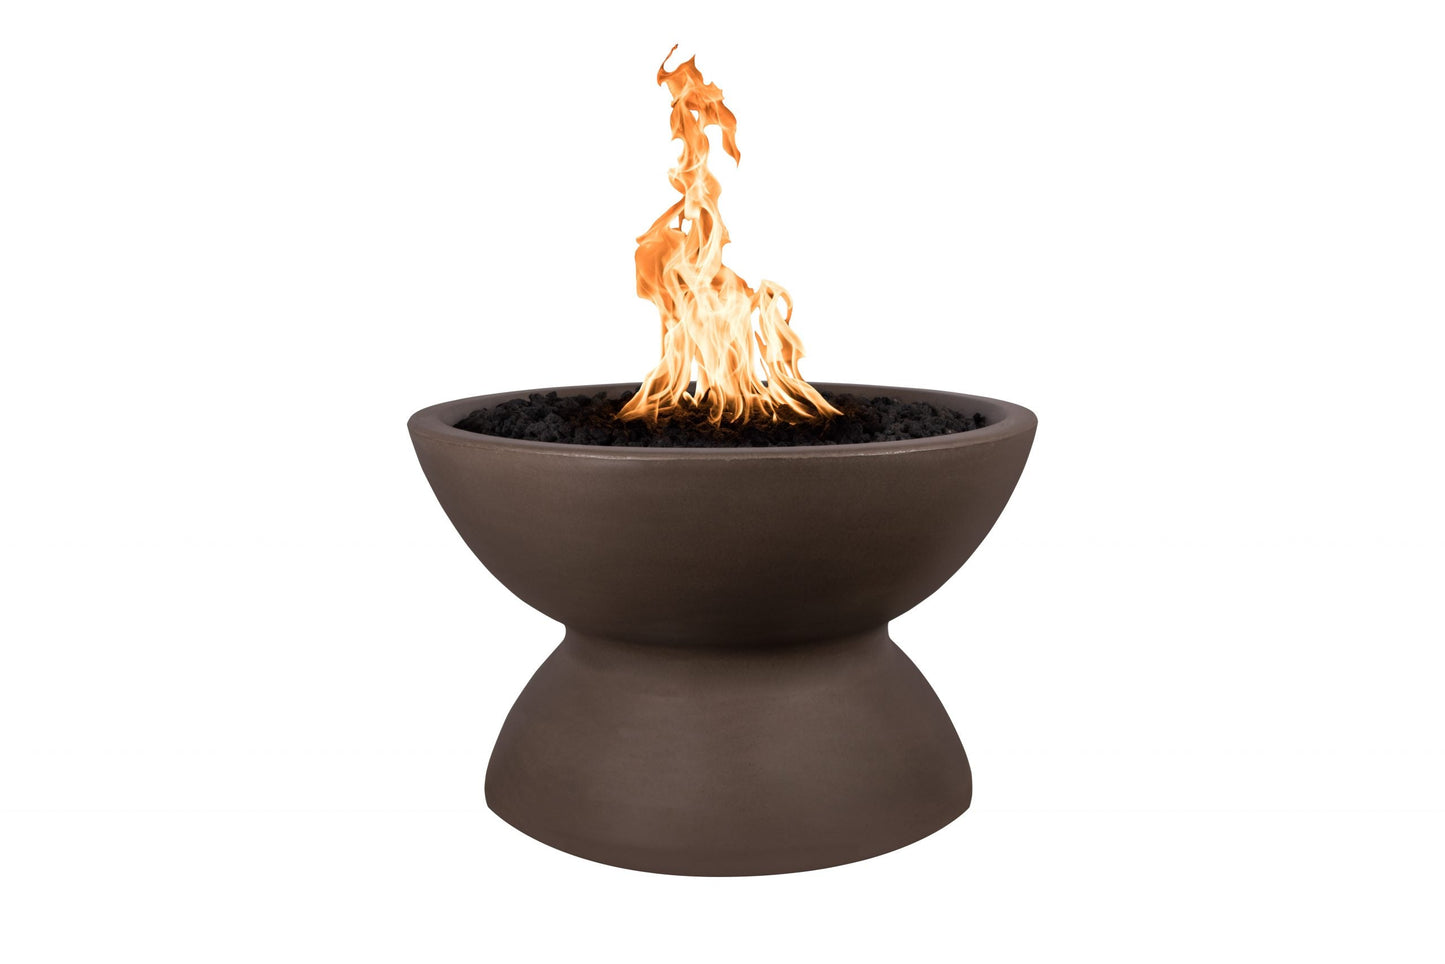 The Outdoor Plus Round Copa 33" Brown GFRC Concrete Liquid Propane Fire Pit with 110V Electronic Ignition